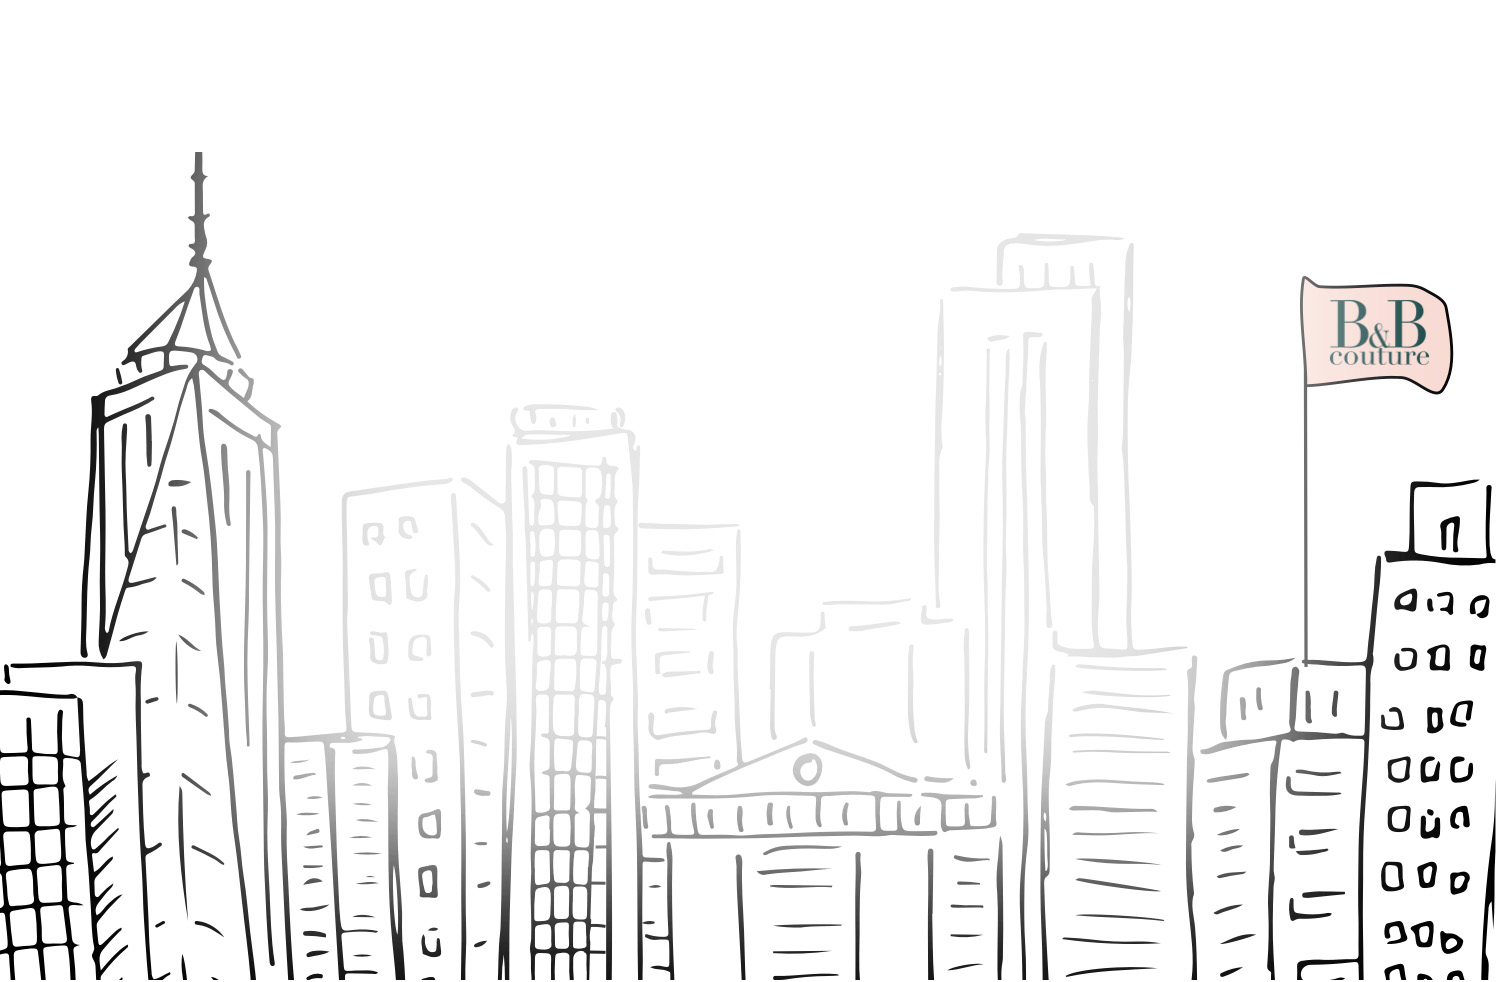 Skyline sketch of New York City shown on mobile device